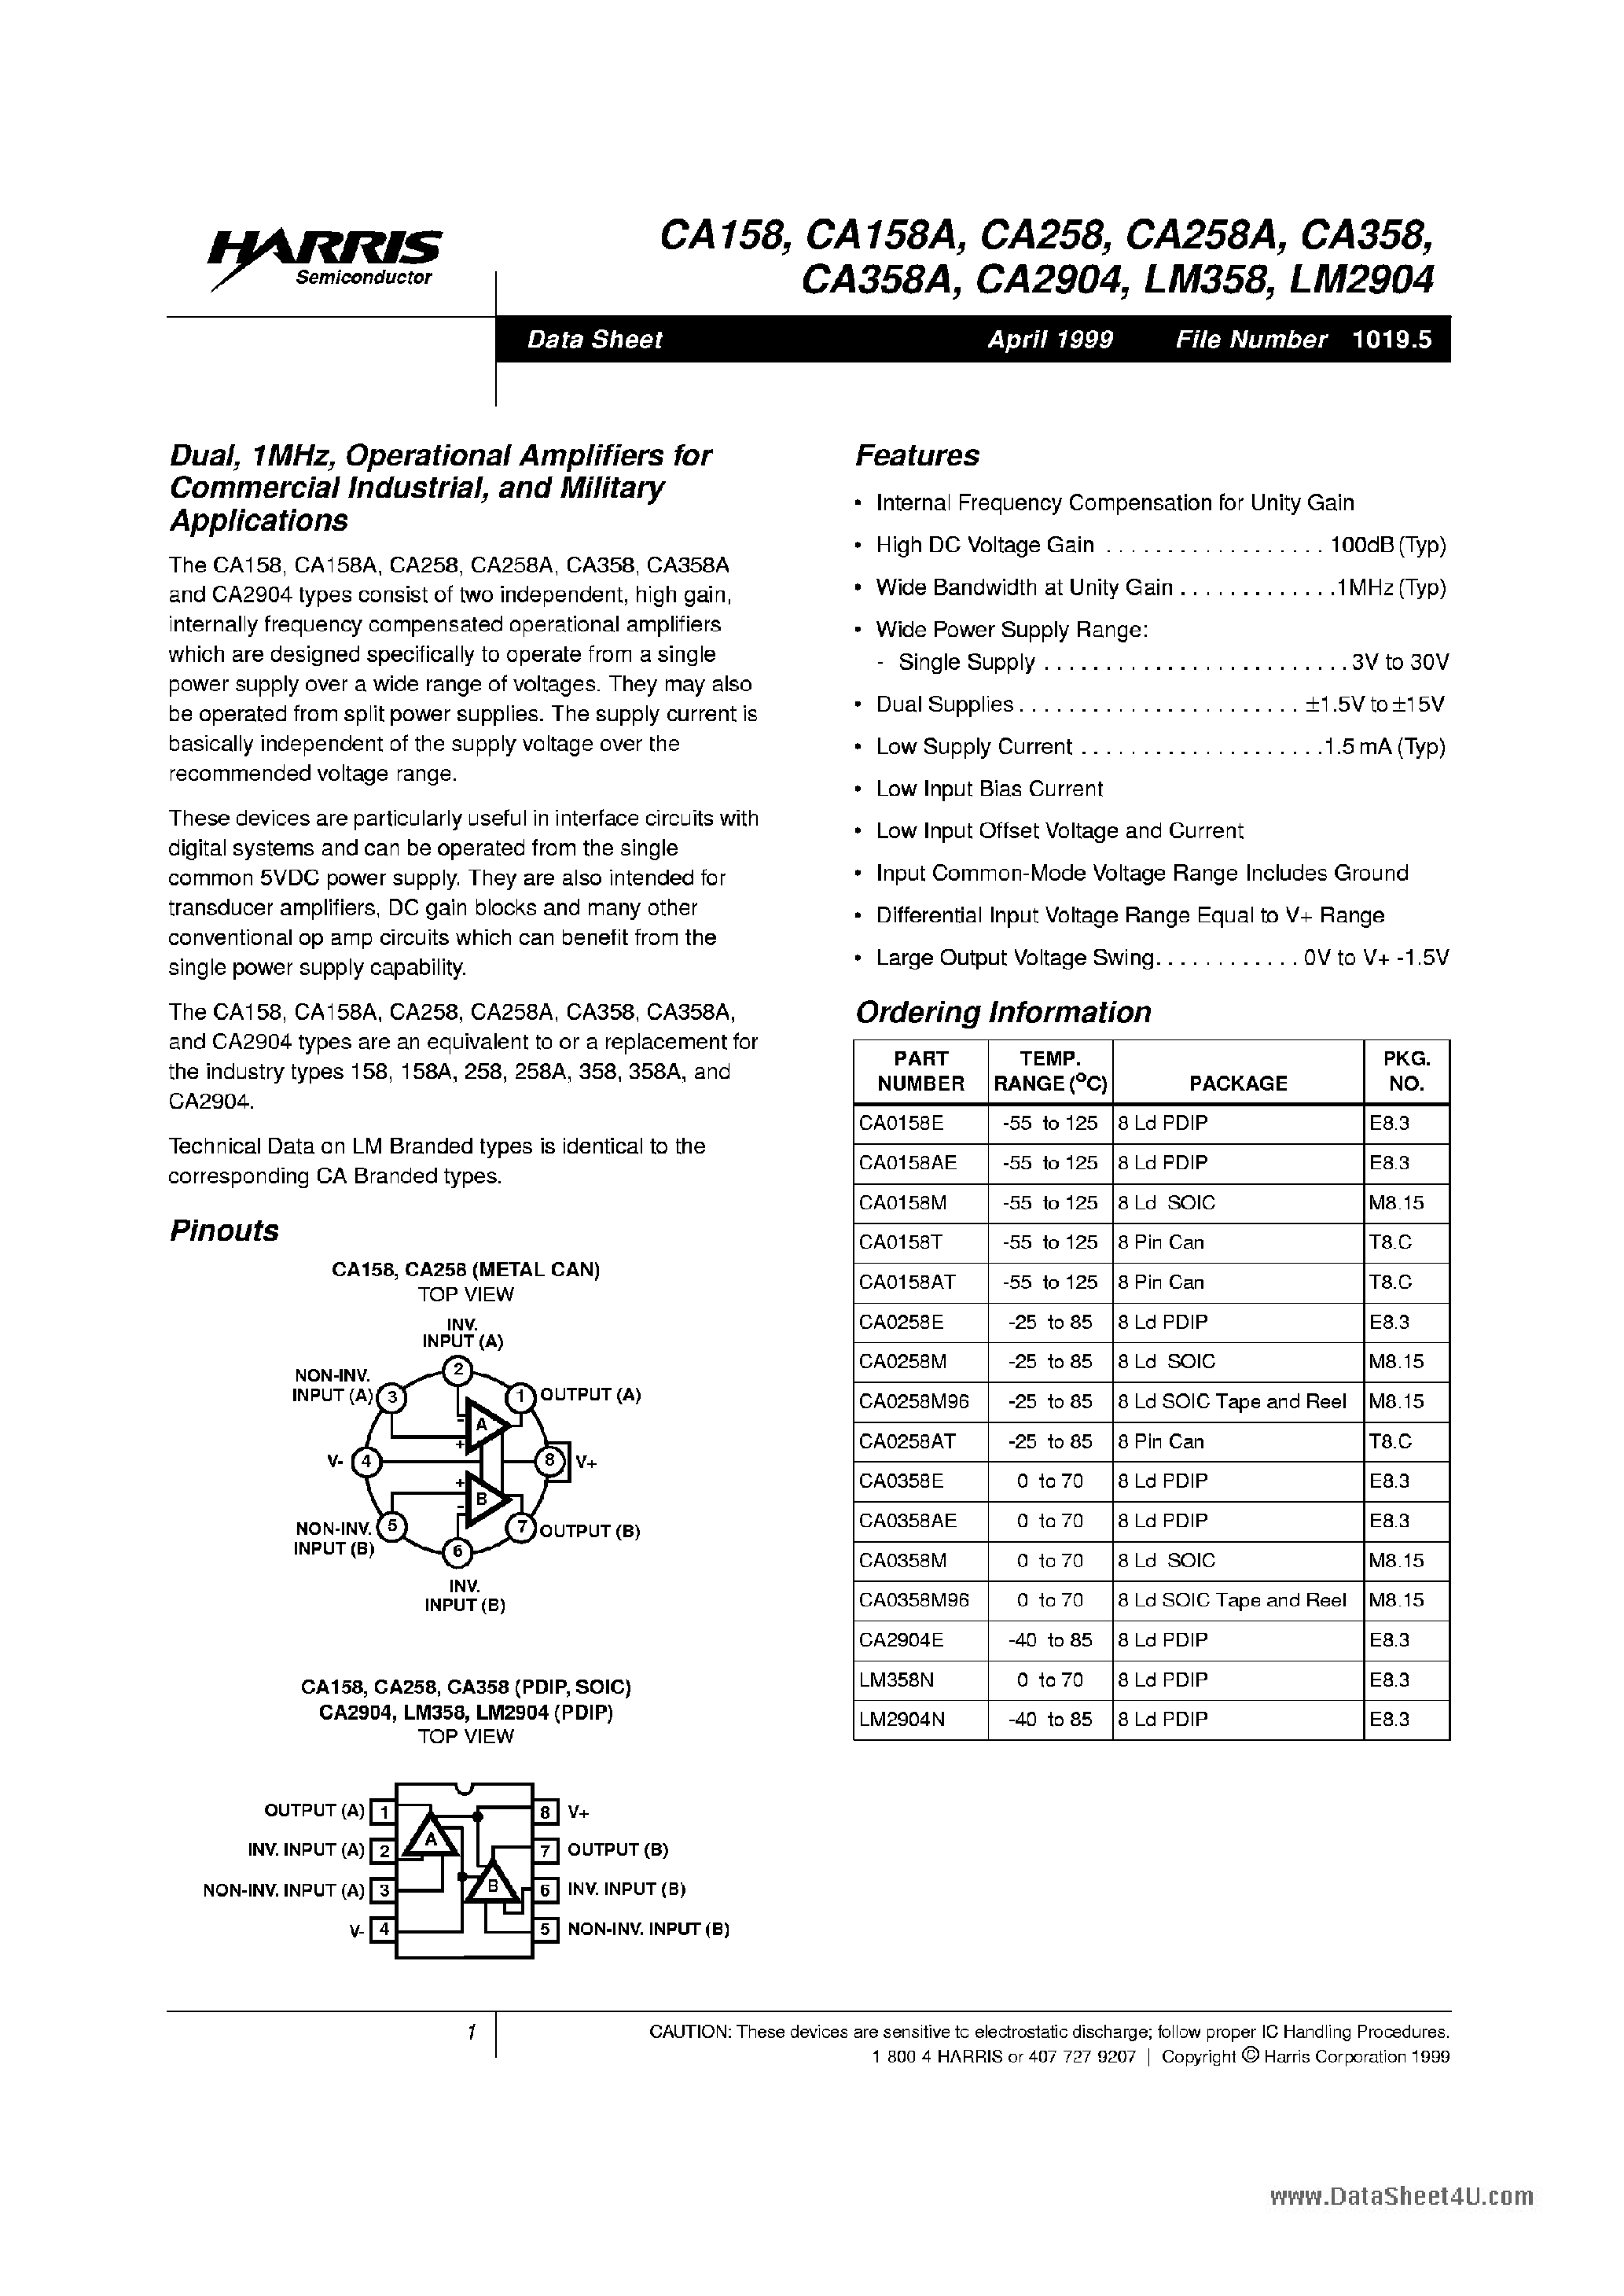 Datasheet CA158 - 1MHz OPERATIONAL AMPLIFIERS page 1